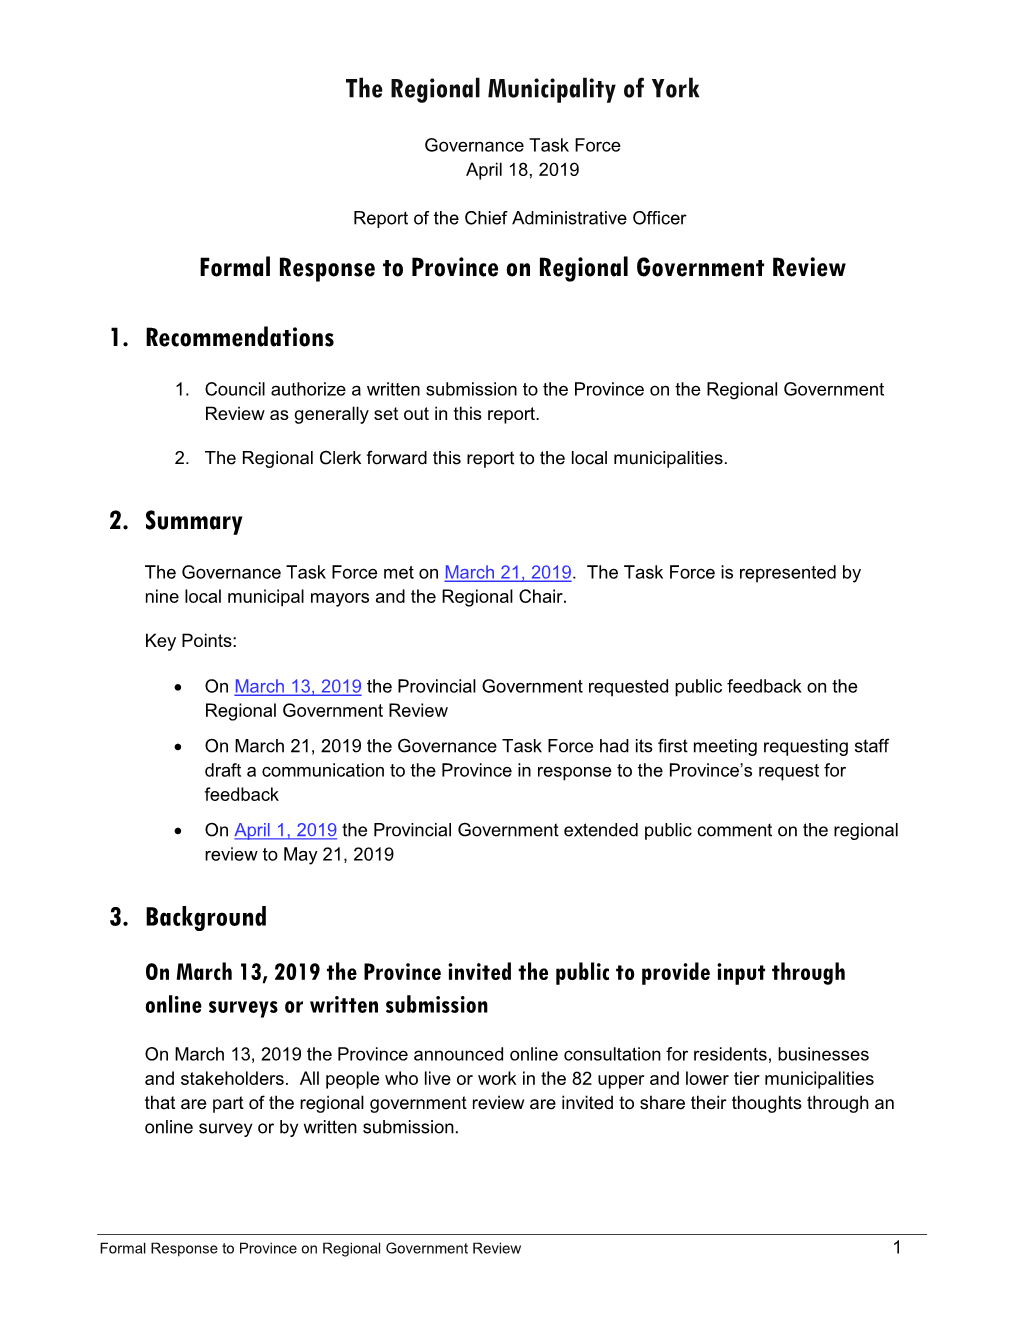 Formal Response to Province on Regional Government Review 1 the Guidelines for a Written Submission Are